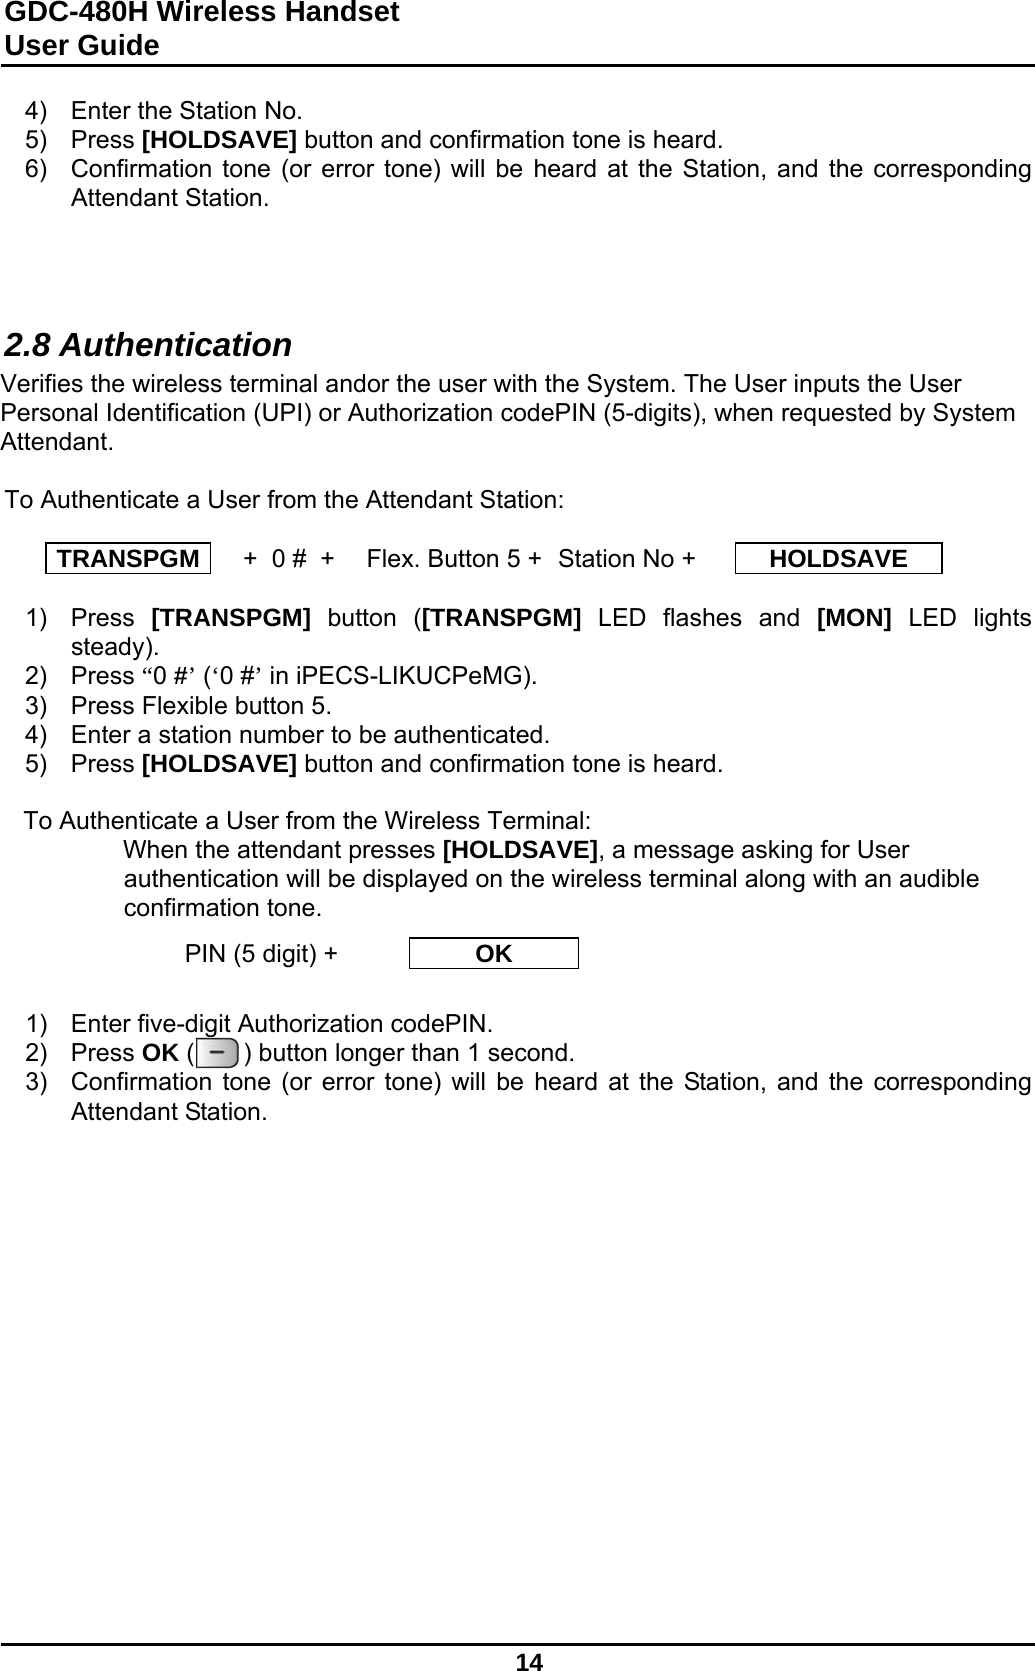 GDC-480H Wireless Handset User Guide   14  4)  Enter the Station No. 5) Press [HOLDSAVE] button and confirmation tone is heard.  6)  Confirmation tone (or error tone) will be heard at the Station, and the corresponding Attendant Station.    2.8 Authentication Verifies the wireless terminal andor the user with the System. The User inputs the User Personal Identification (UPI) or Authorization codePIN (5-digits), when requested by System Attendant.  To Authenticate a User from the Attendant Station:  TRANSPGM   +  0 #  +  Flex. Button 5 +  Station No +  HOLDSAVE  1) Press [TRANSPGM] button ([TRANSPGM] LED flashes and [MON] LED lights steady). 2) Press “0 #’ (‘0 #’ in iPECS-LIKUCPeMG).  3)  Press Flexible button 5. 4)  Enter a station number to be authenticated. 5) Press [HOLDSAVE] button and confirmation tone is heard.   To Authenticate a User from the Wireless Terminal: When the attendant presses [HOLDSAVE], a message asking for User authentication will be displayed on the wireless terminal along with an audible confirmation tone.    1)  Enter five-digit Authorization codePIN. 2) Press OK (       ) button longer than 1 second. 3)  Confirmation tone (or error tone) will be heard at the Station, and the corresponding Attendant Station.                PIN (5 digit) +  OK 